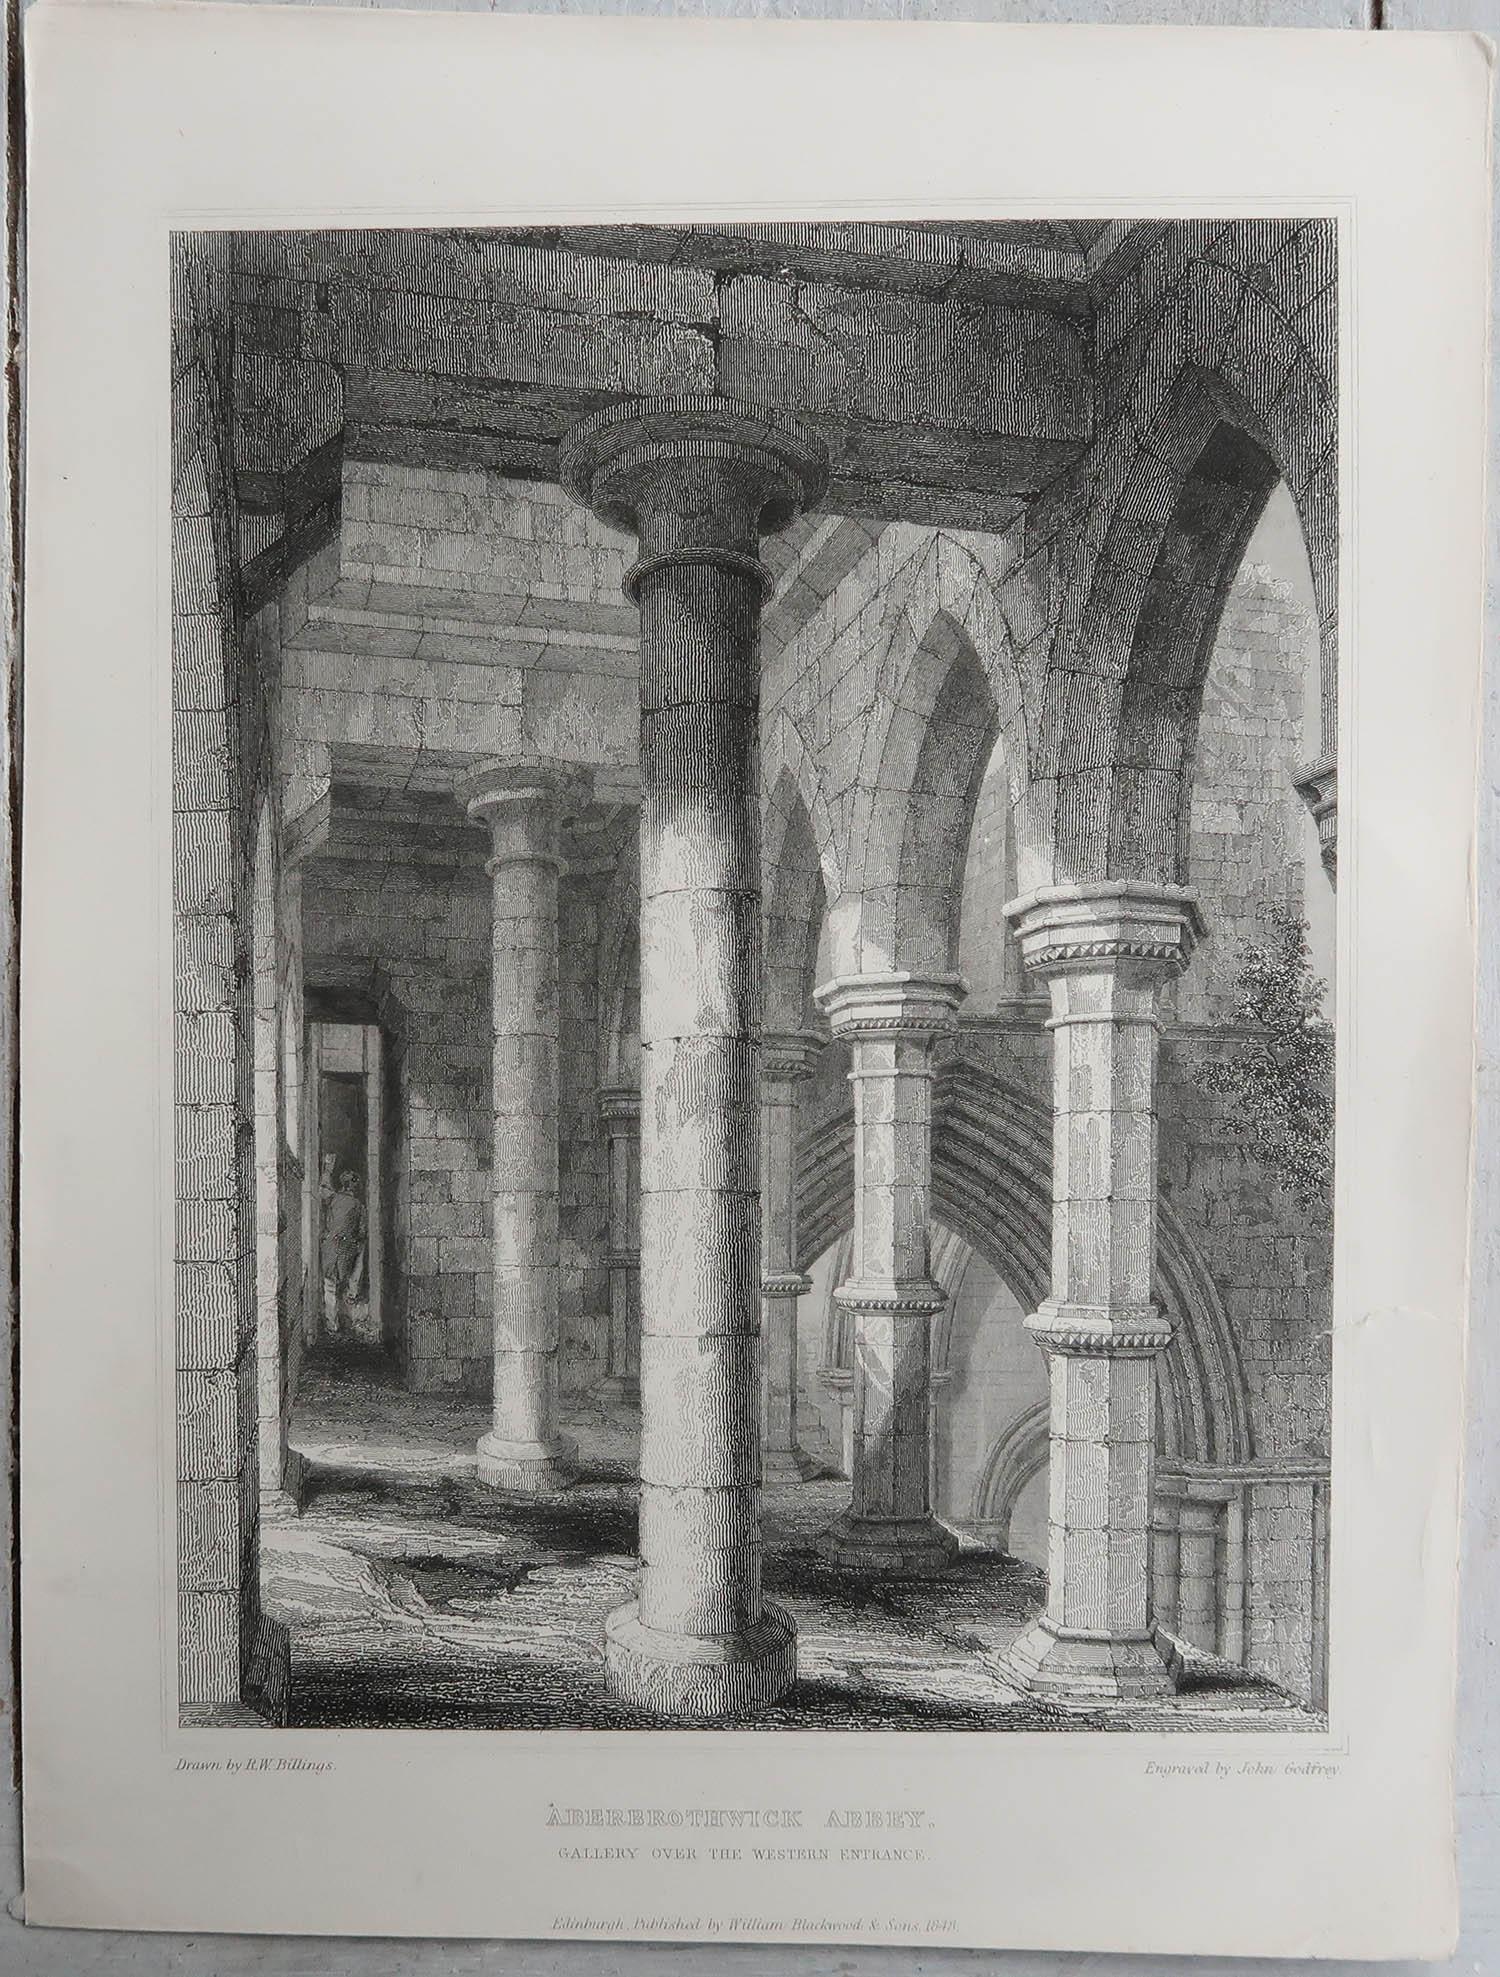 Scottish Set of 18 Gothic Architectural Prints After Robert William Billings, Dated, 1848